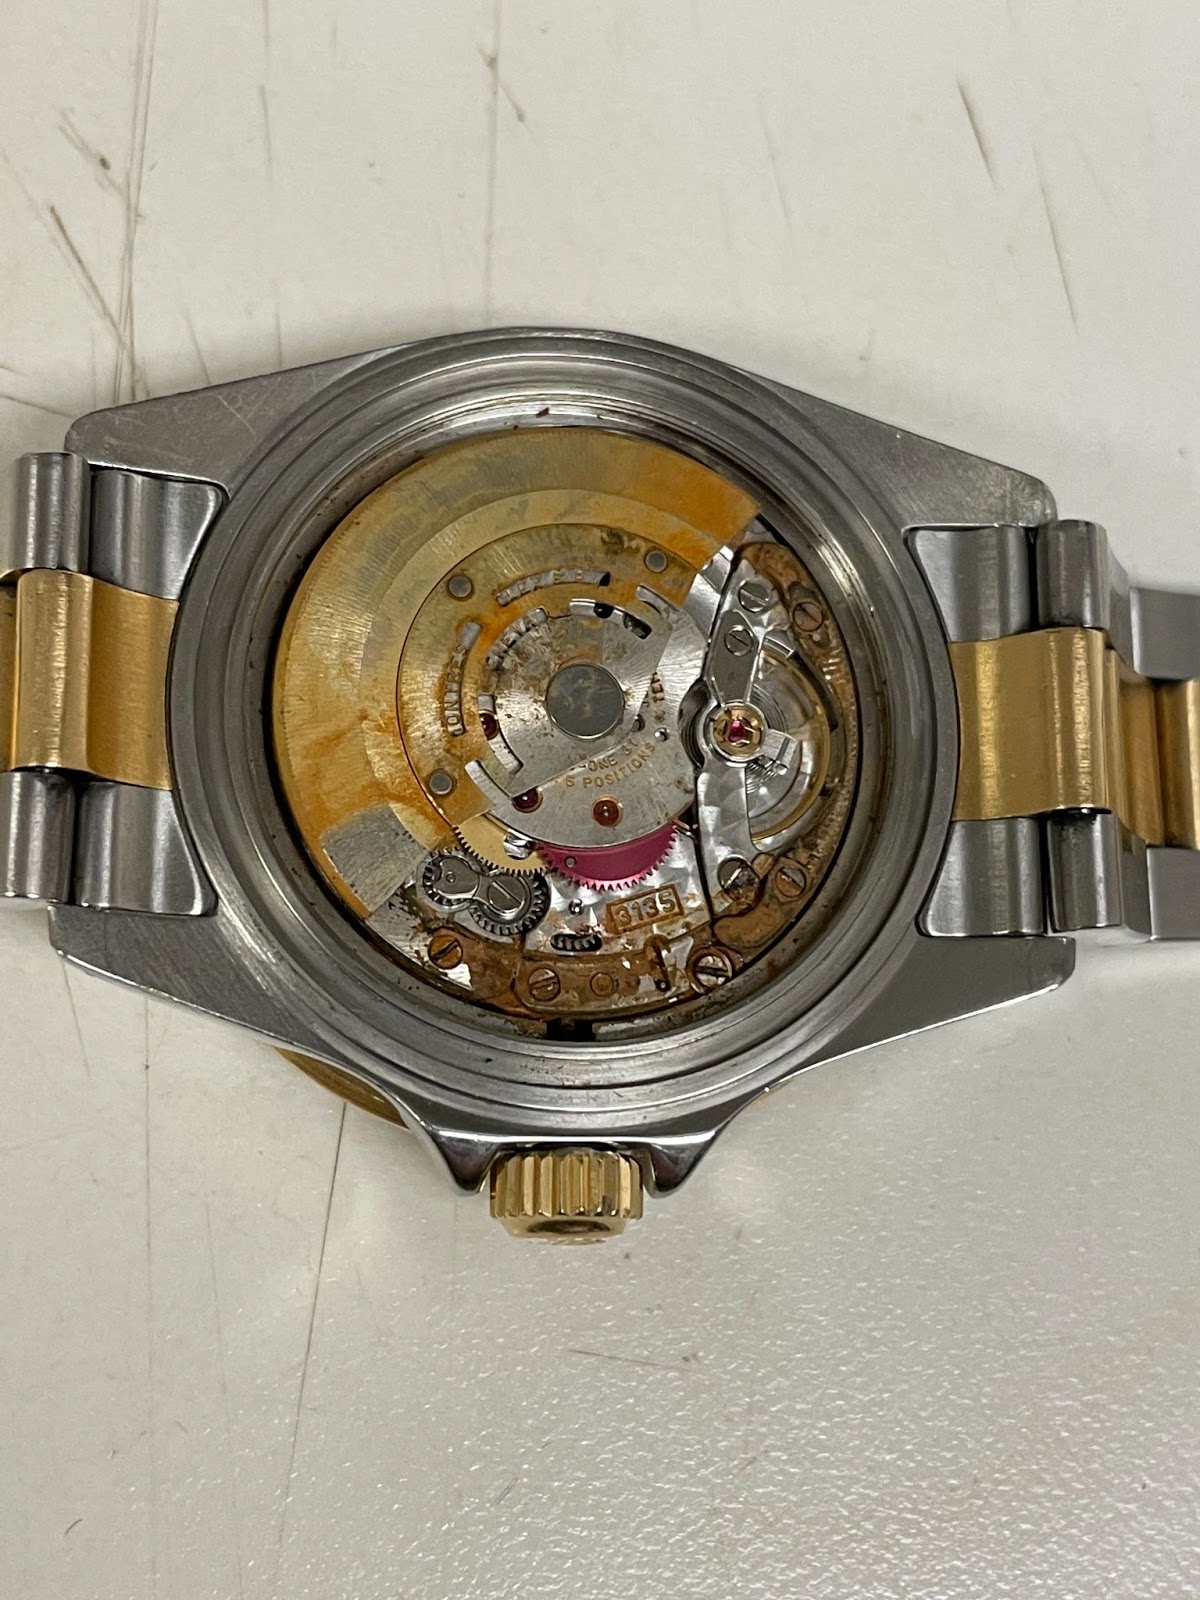 Rolex Submariner, Dive Into This Watch Renovation